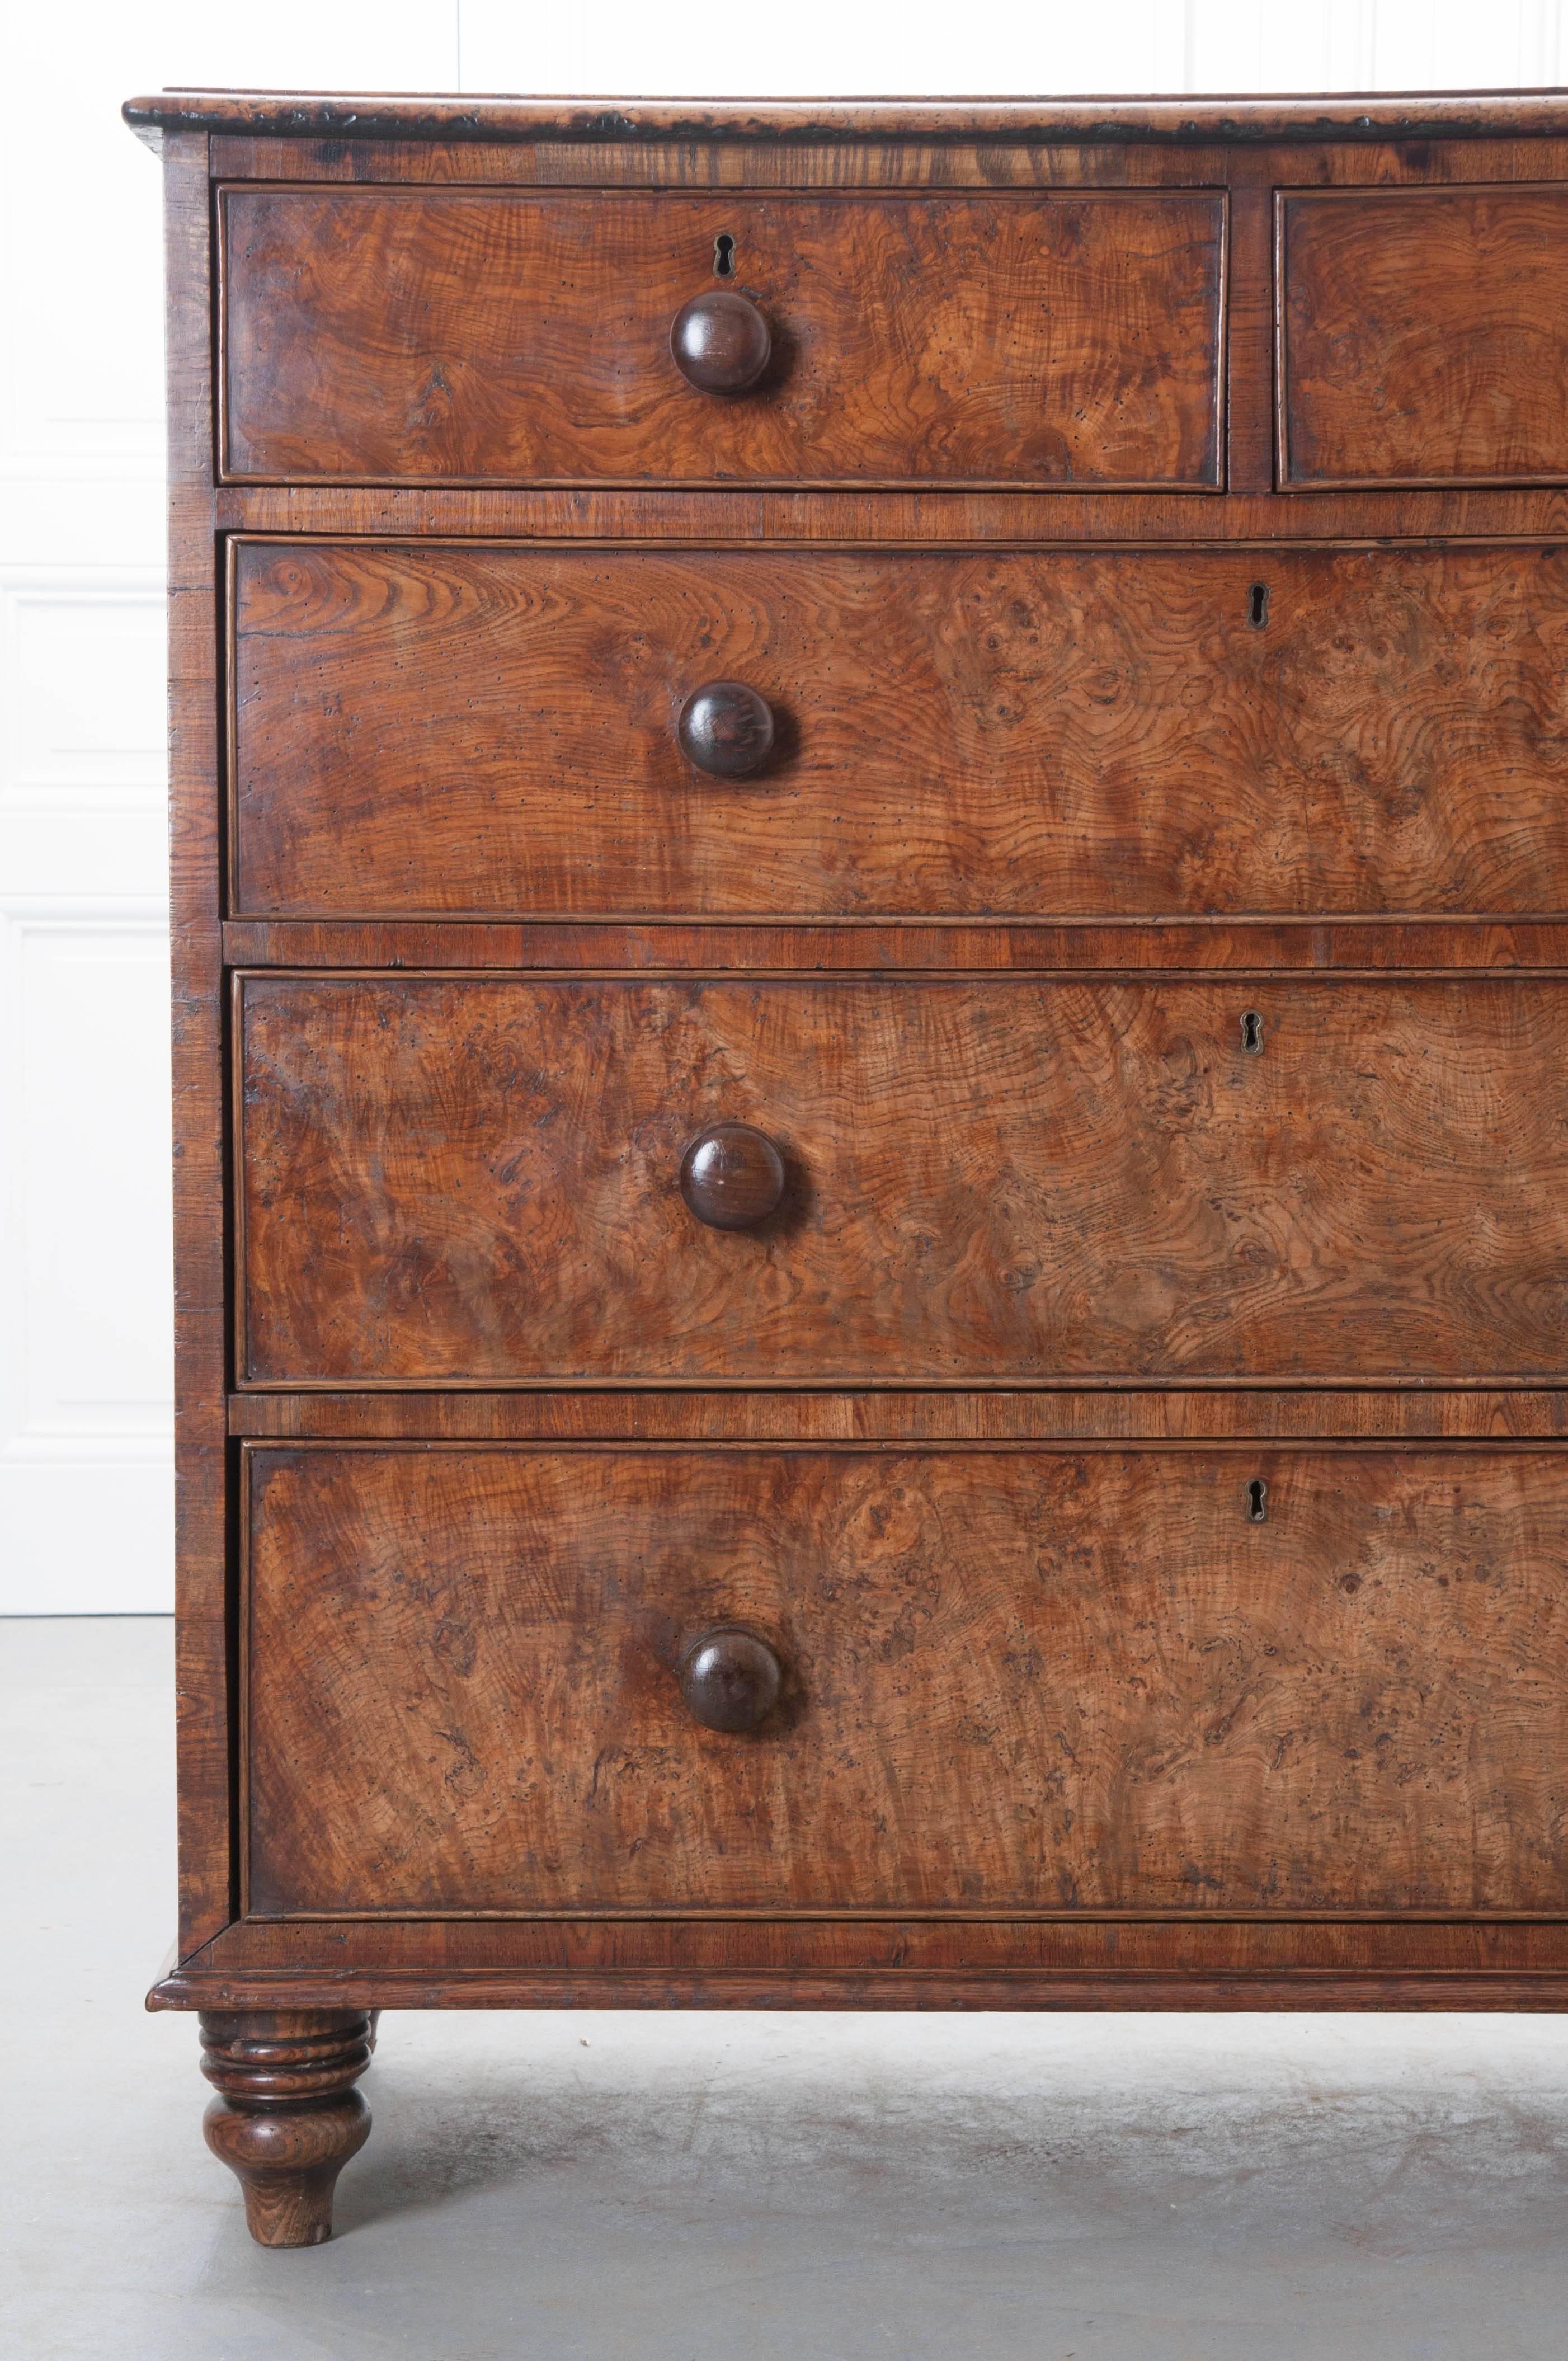 An absolutely stunning five-drawer burl oak chest of drawers from the early part of the 19th century, England. This handsome chest is outfitted with five total drawers: two smaller top drawers, with three larger drawers below that are graduated in